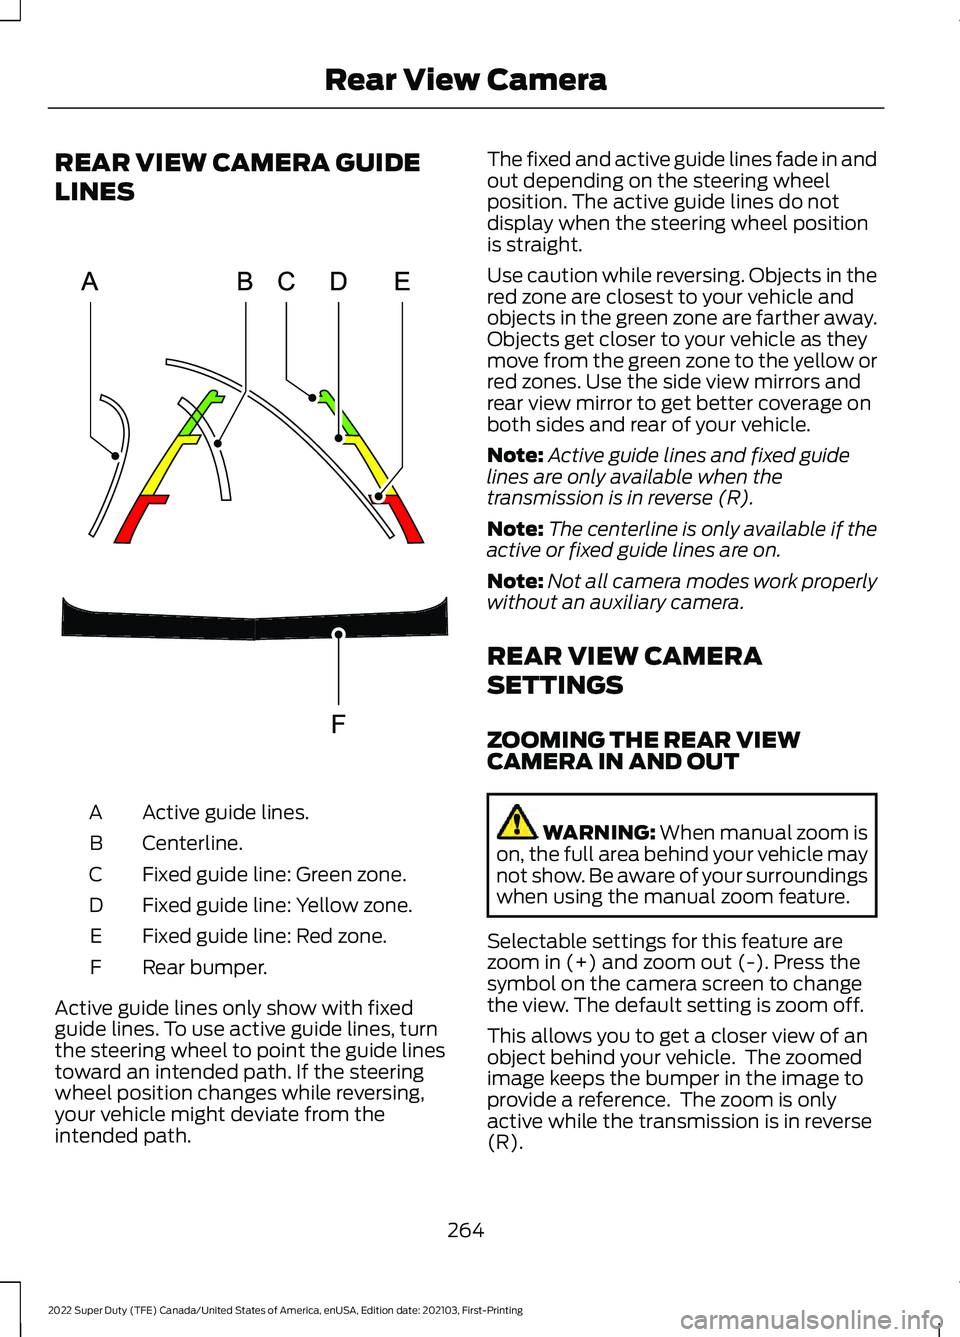 FORD F-350 2022  Owners Manual REAR VIEW CAMERA GUIDE
LINES
Active guide lines.
A
Centerline.
B
Fixed guide line: Green zone.
C
Fixed guide line: Yellow zone.
D
Fixed guide line: Red zone.
E
Rear bumper.
F
Active guide lines only s